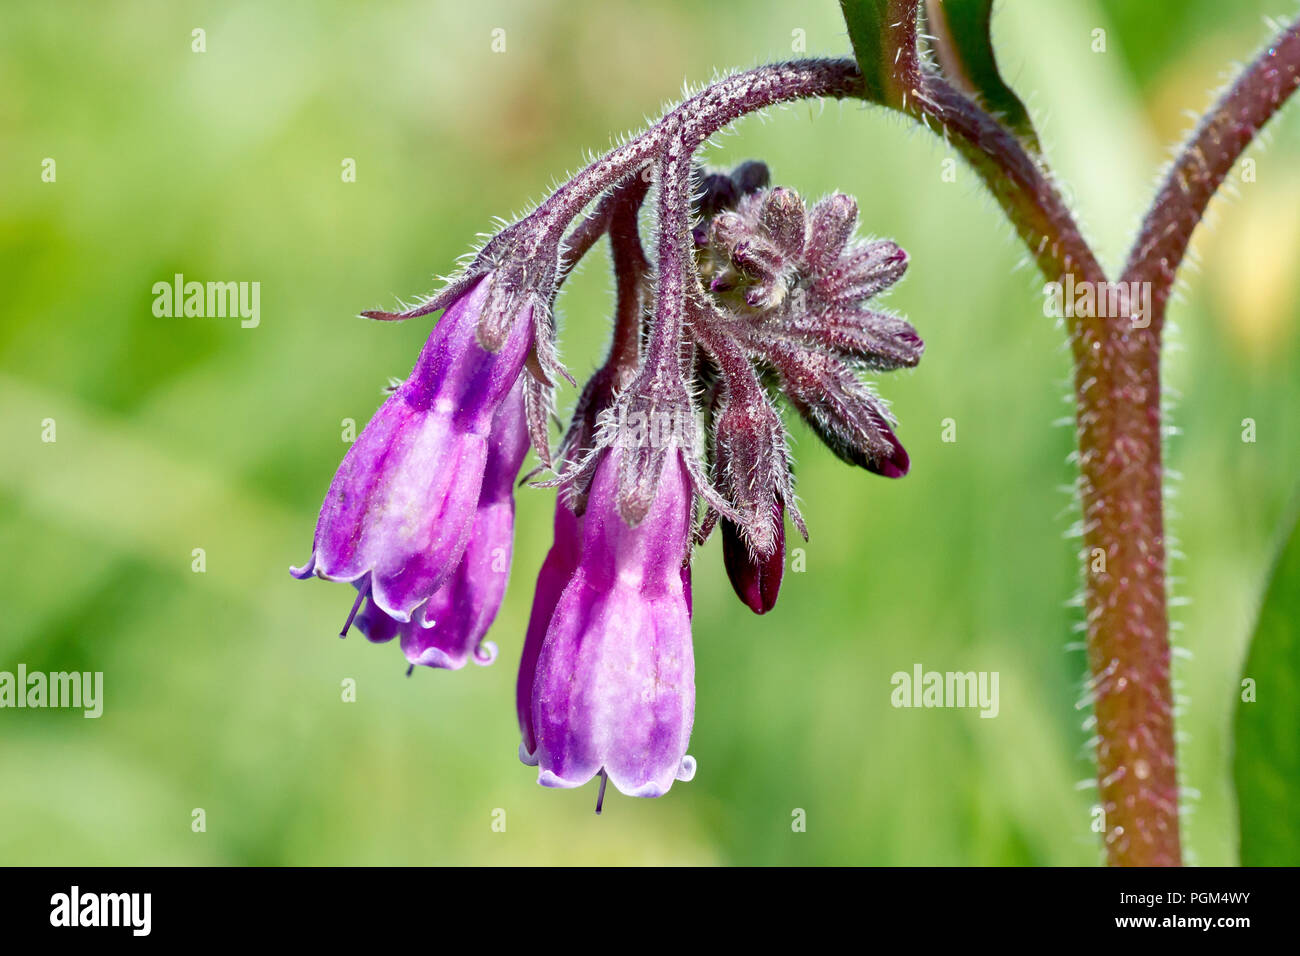 Comfrey, probably the hybrid species Russian Comfrey (symphytum x uplandicum), close up of the flowers with buds. Stock Photo